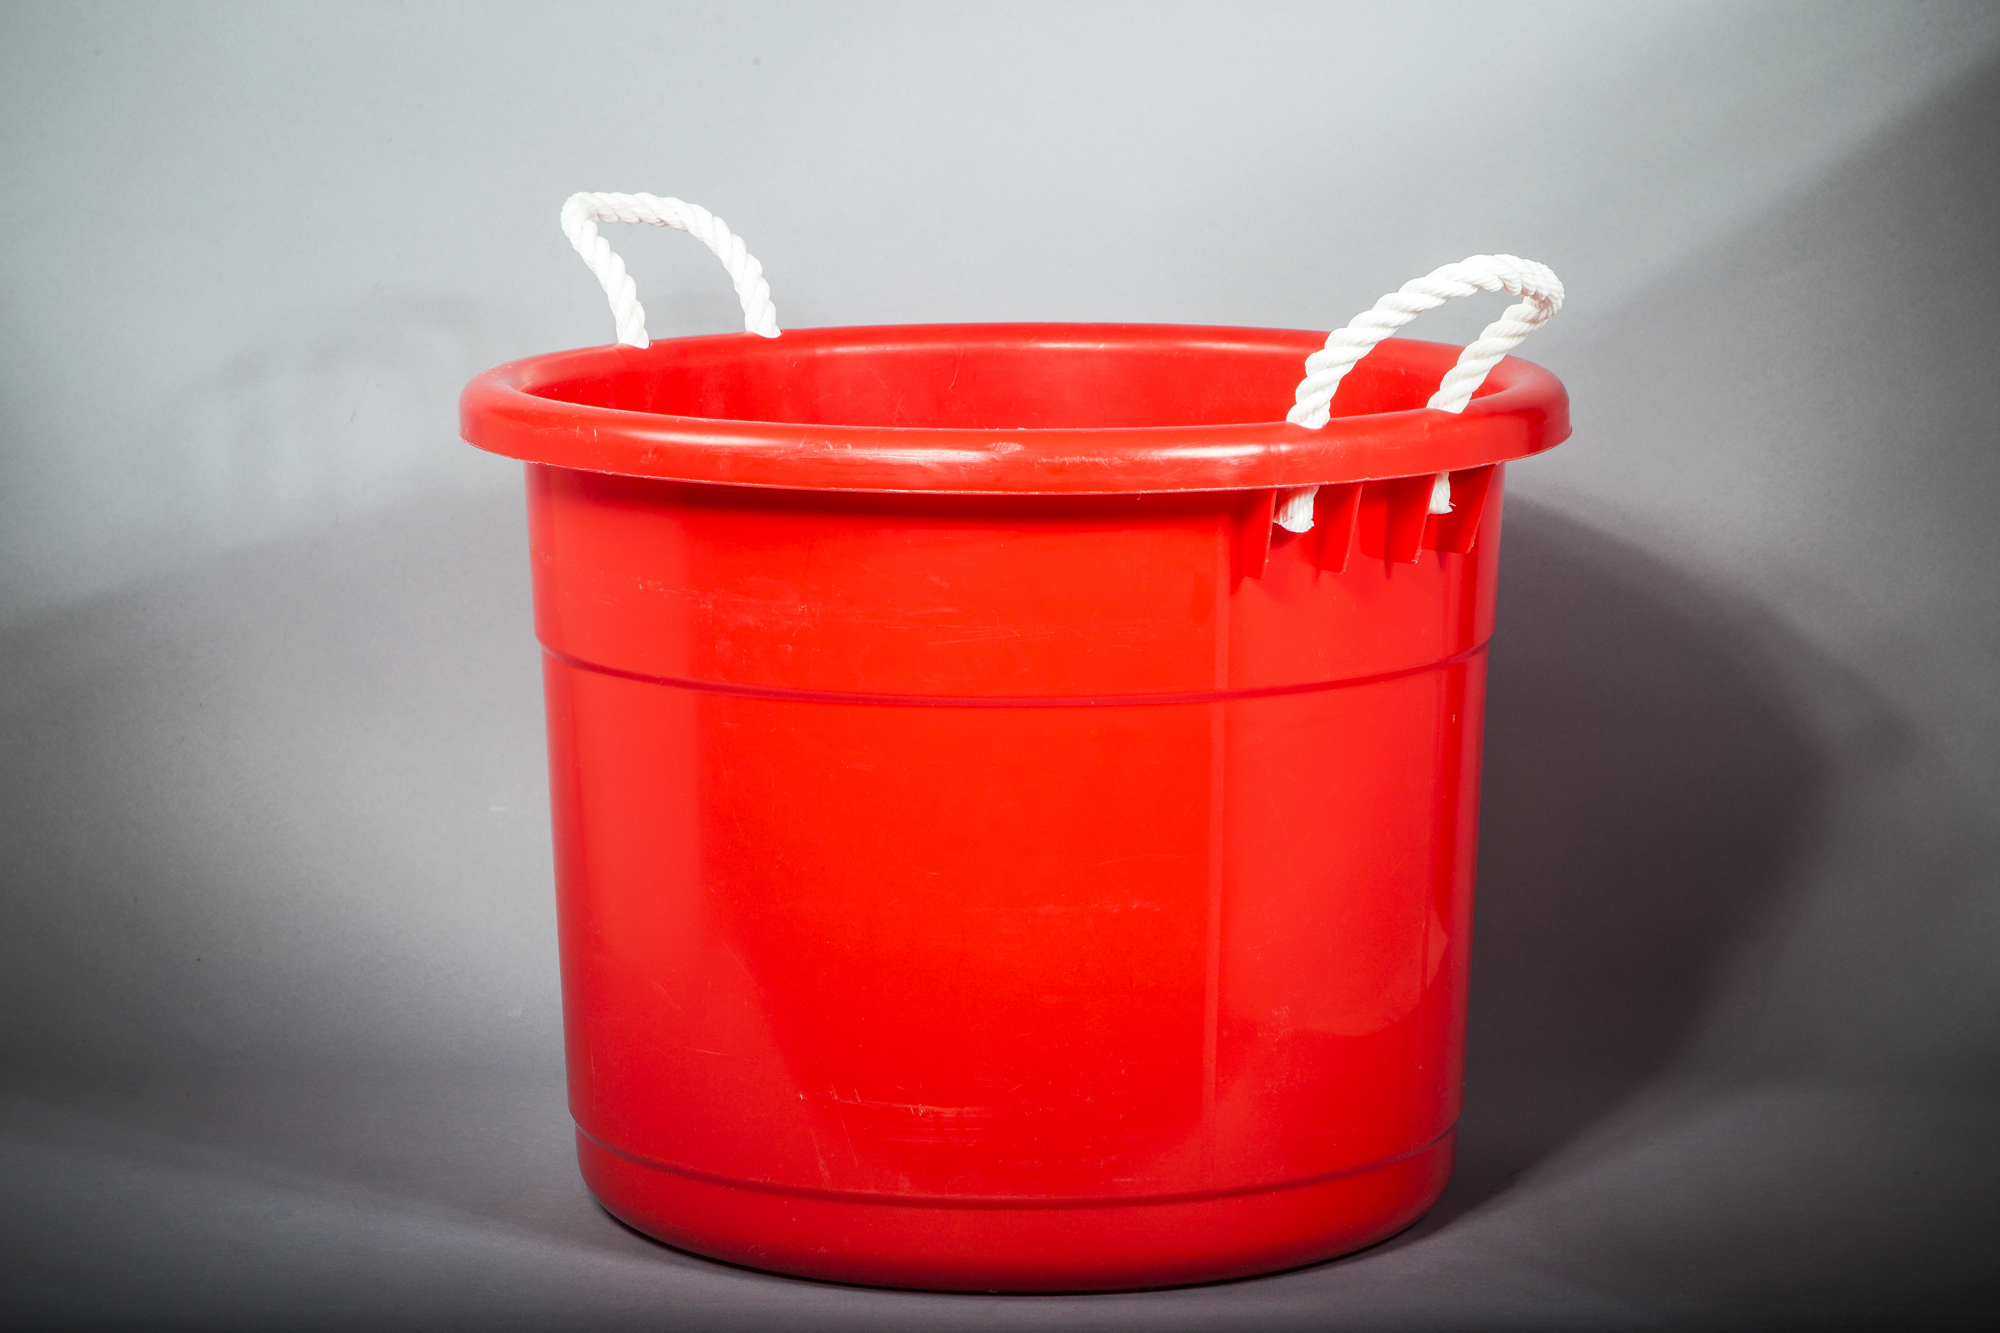 19 GALLON RED PLASTIC TUB, ROPE HANDLES AM Party Rentals